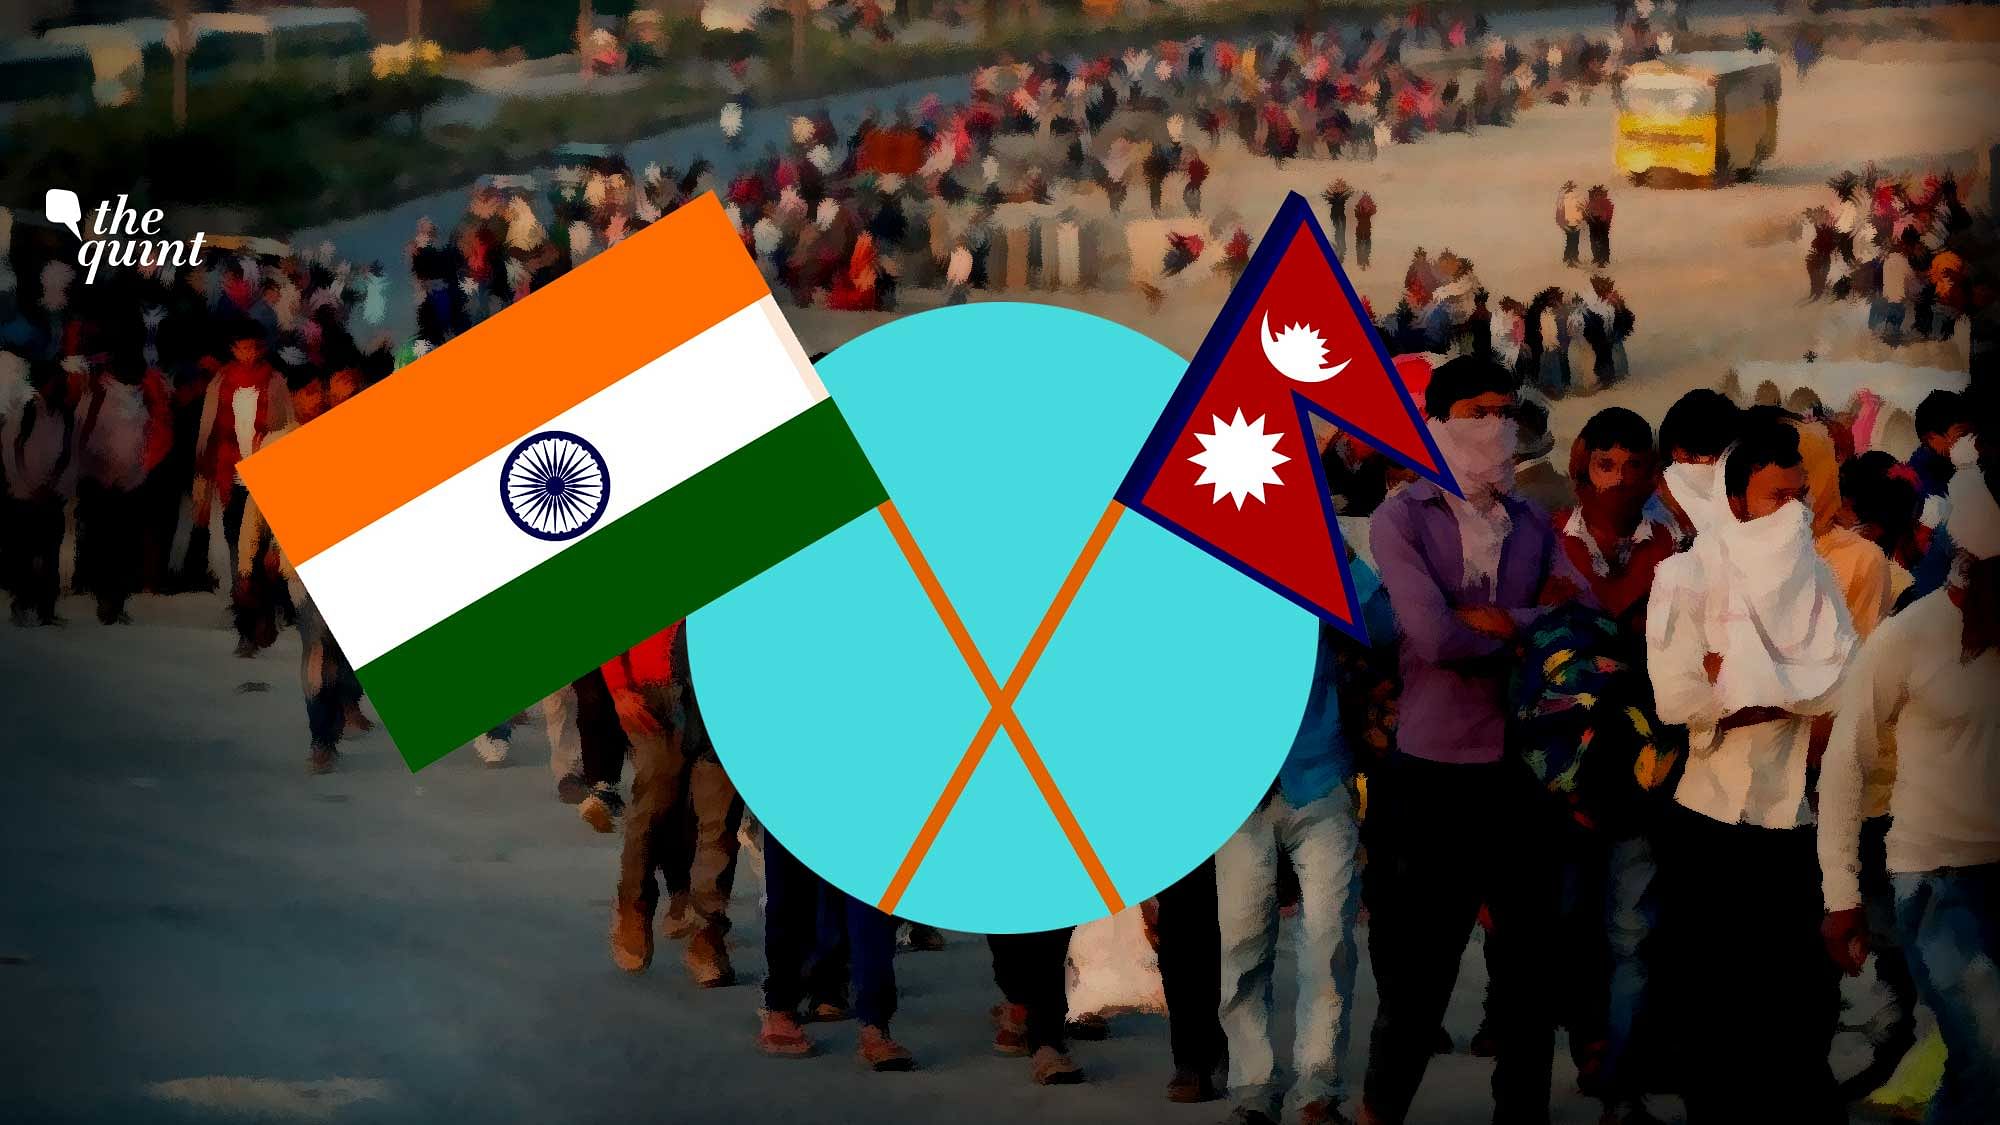 Image of exodus of migrant workers, and Nepal and India’s flags (R and L) used for representational purposes.